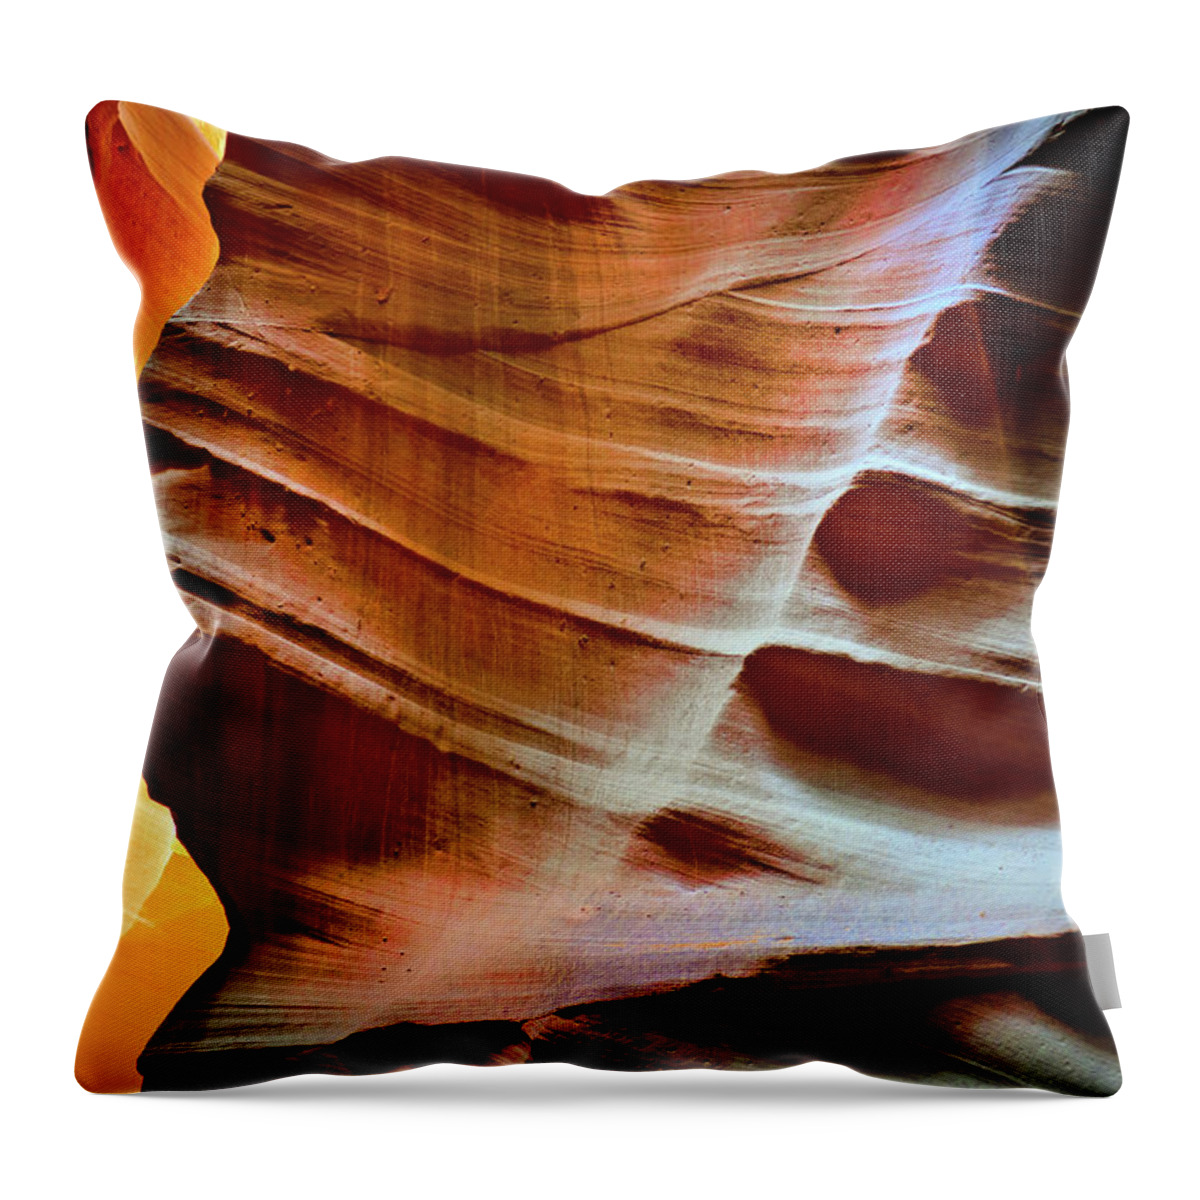 Scenics Throw Pillow featuring the photograph Shapes At Antelope Canyon In Arizona by Pavliha